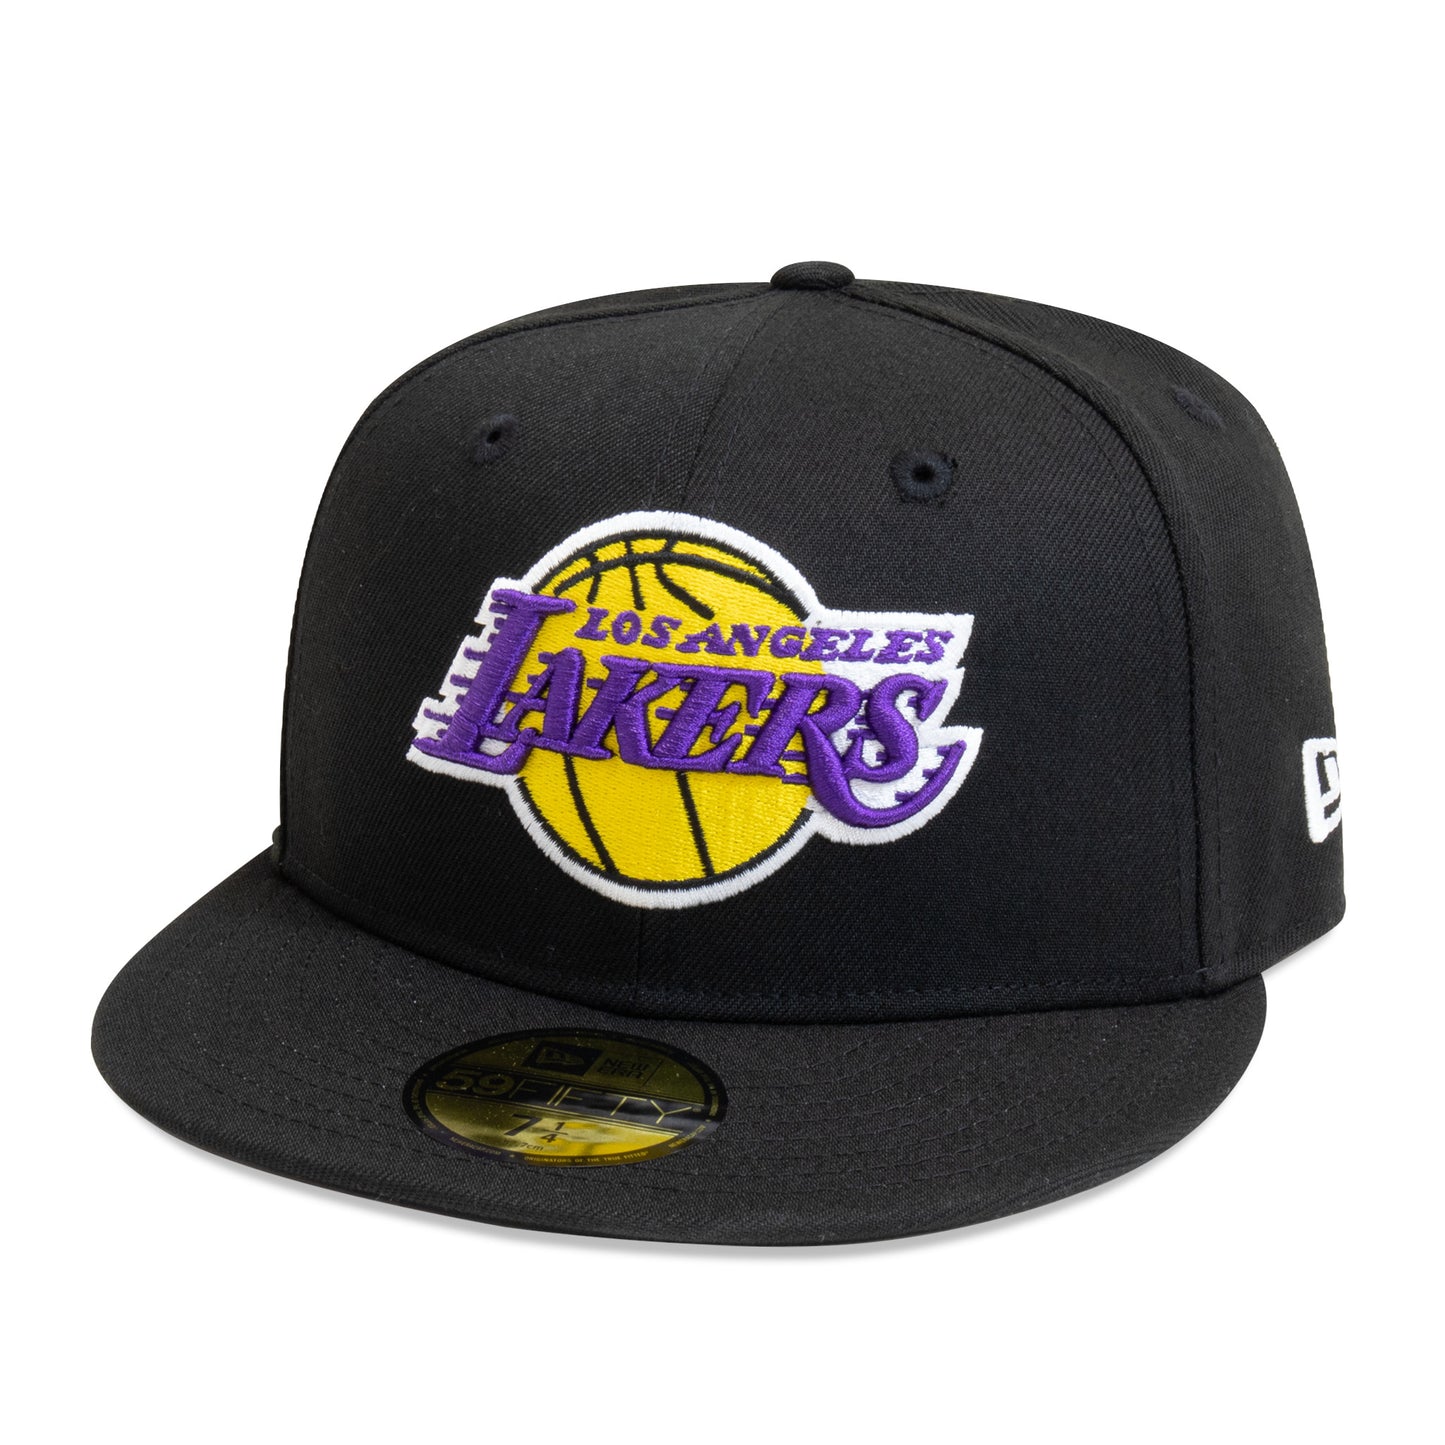 New Era - 59Fifty Fitted Essential Los Angeles Lakers - Black/OTC - Headz Up 